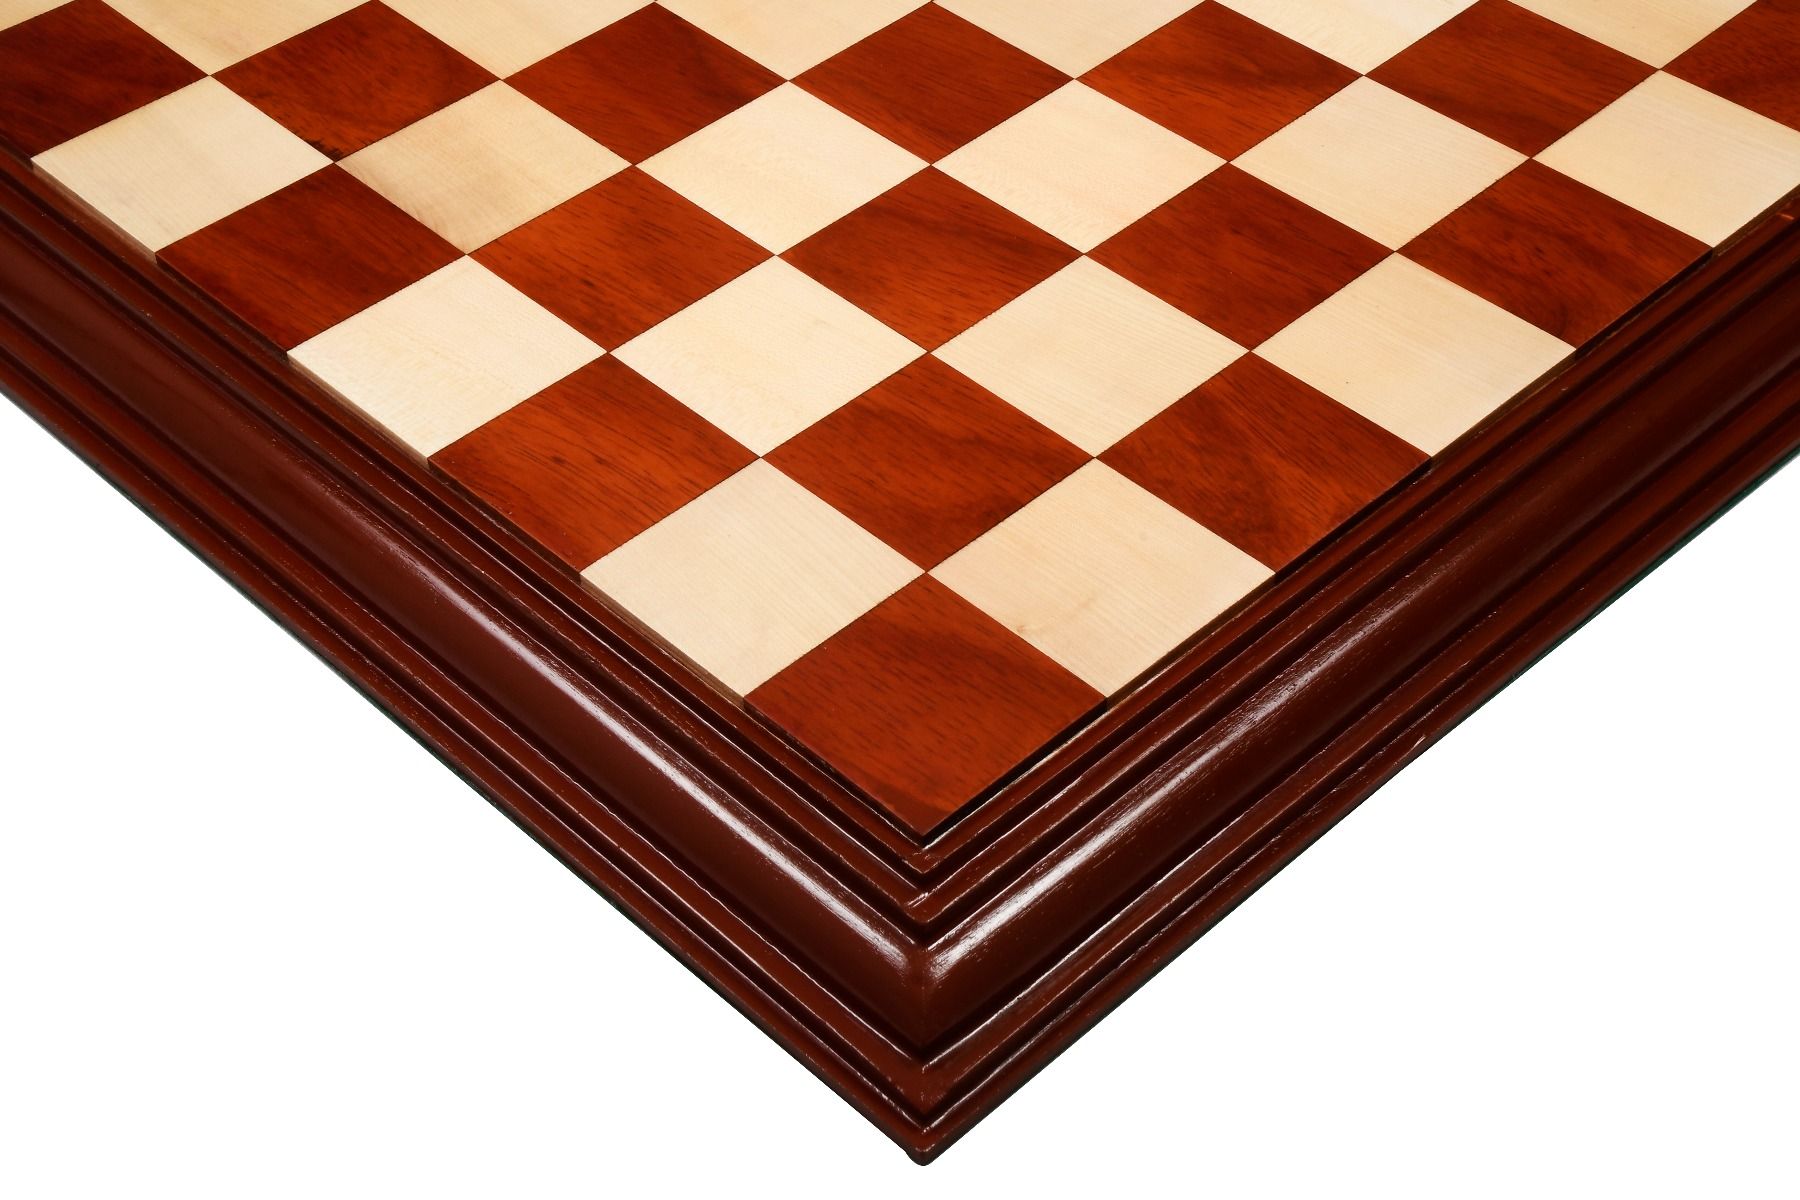 Details about   21" Large Wooden Chess Board Rosewood & Maple Square 55mm Handmade Fine Polish 